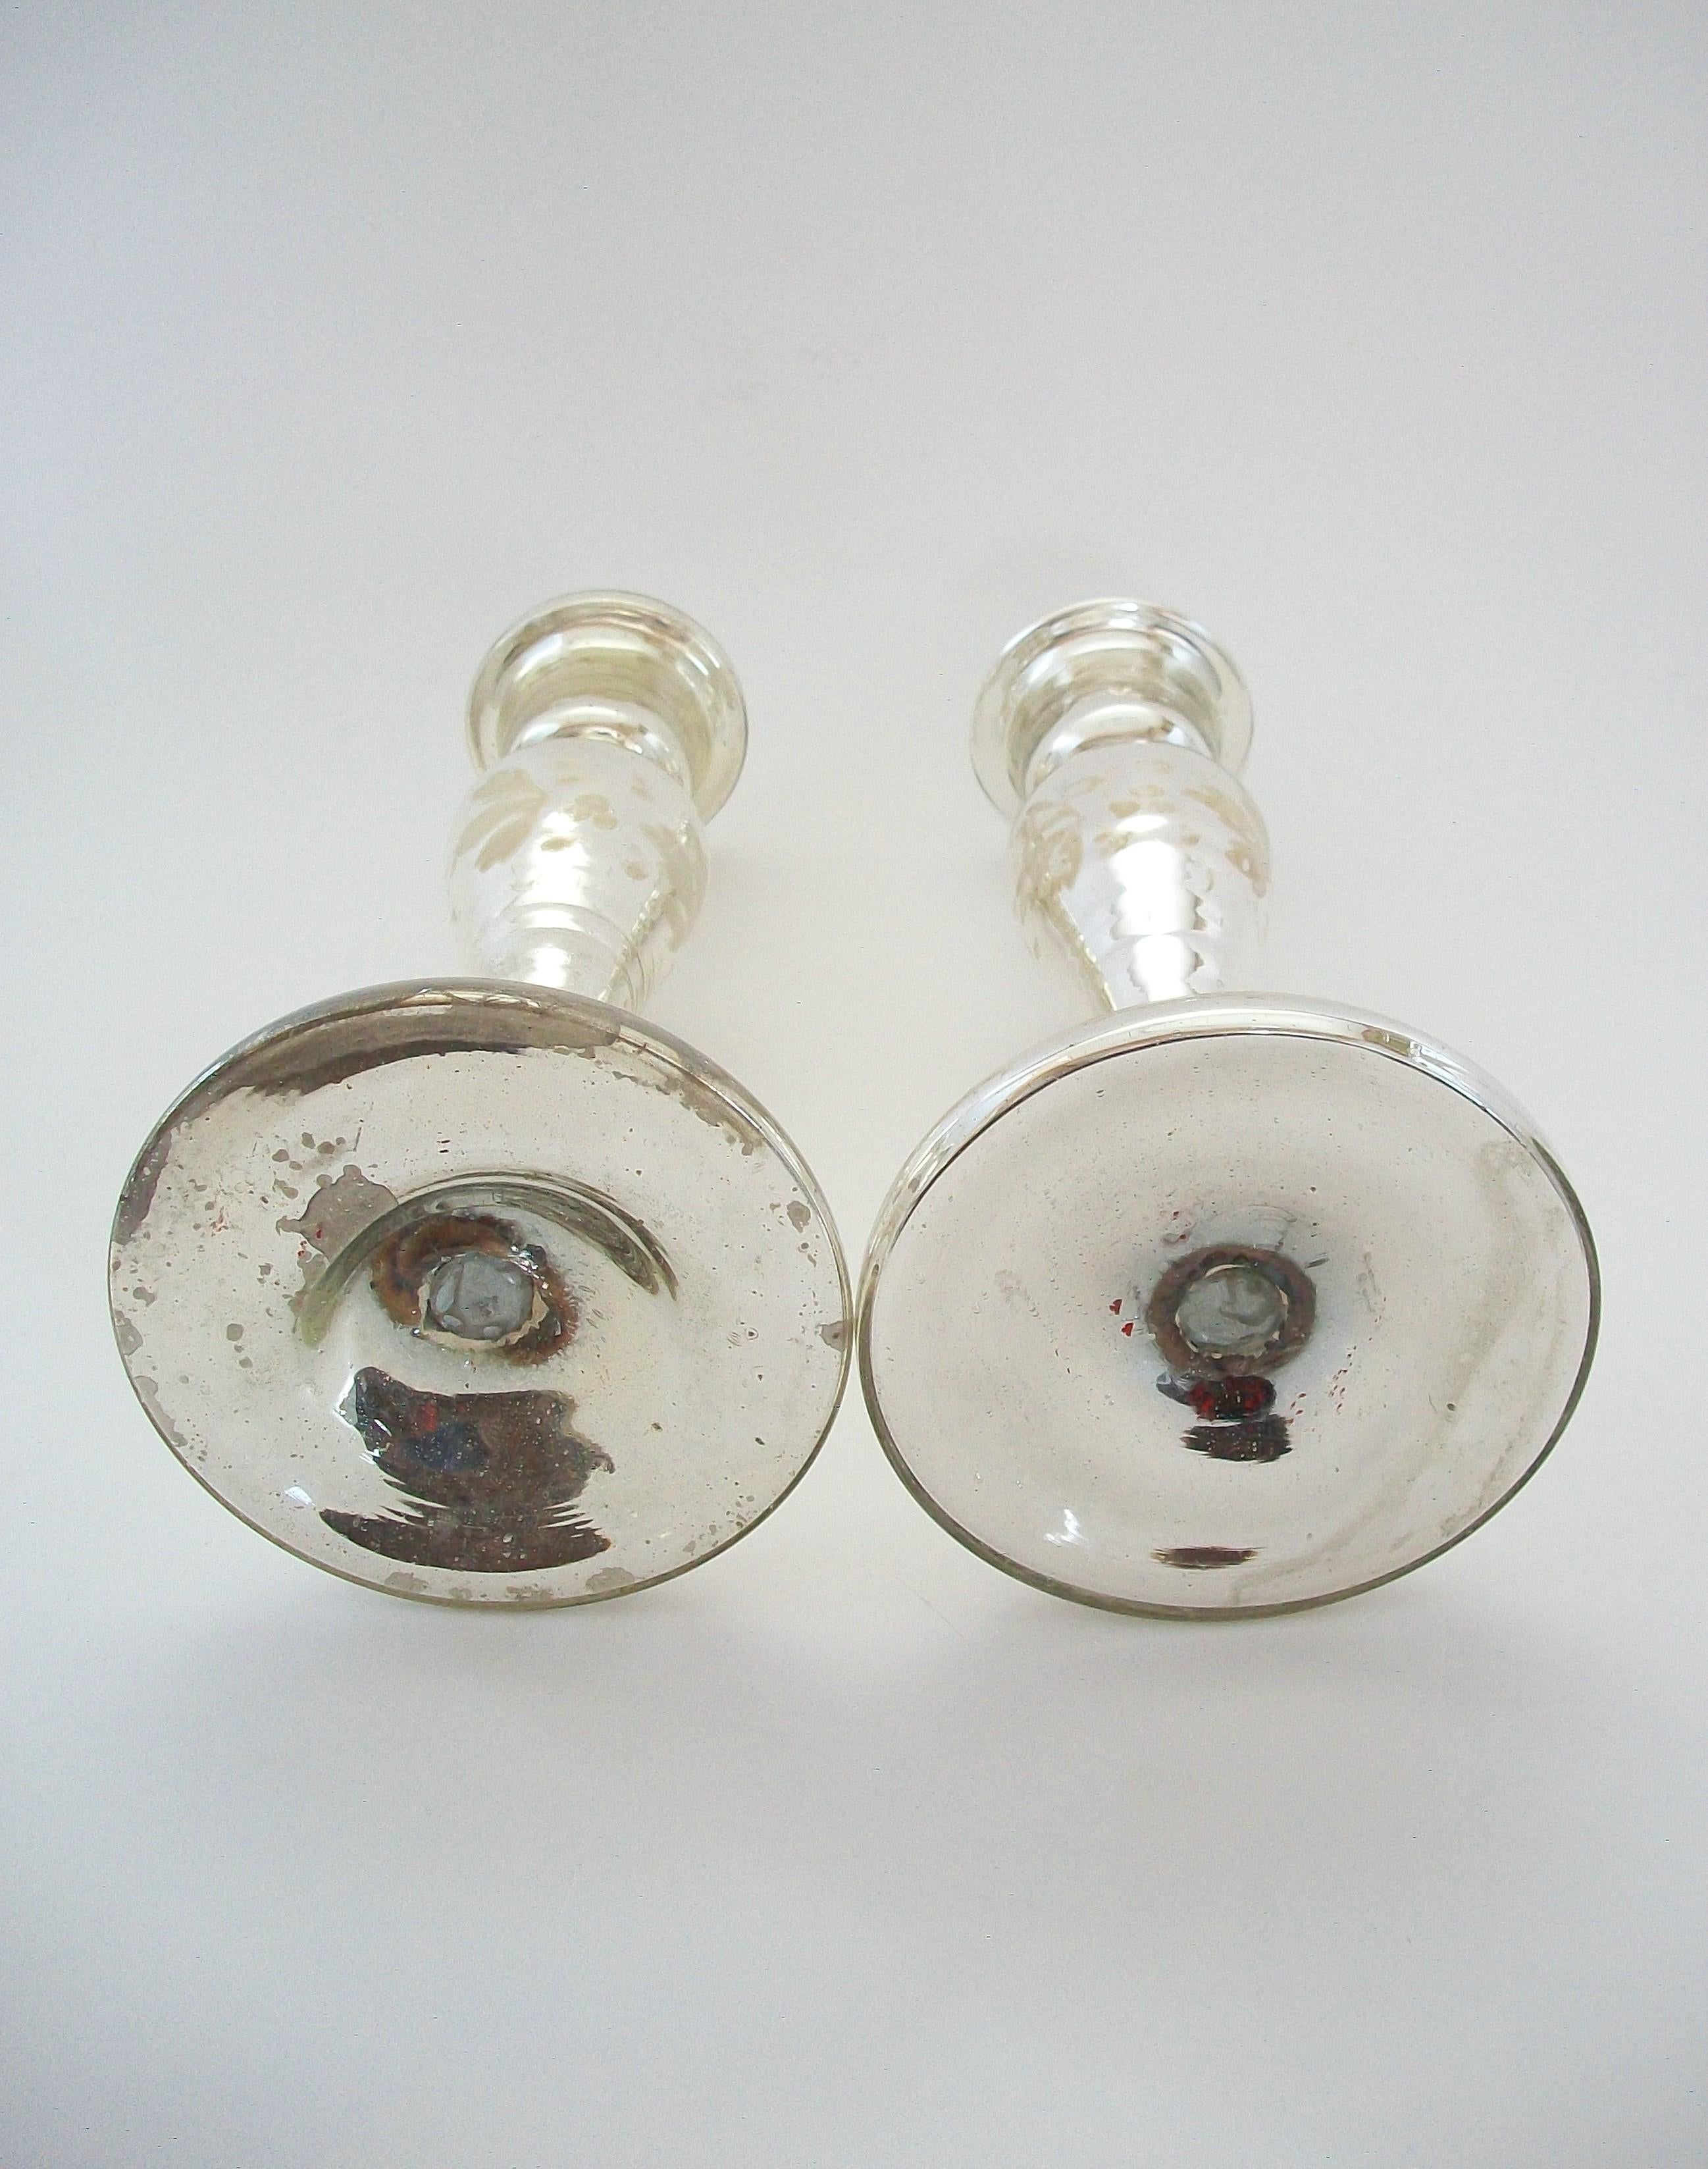 Antique Pair of White Painted Mercury Glass Candlesticks - France - Circa 1880 For Sale 2